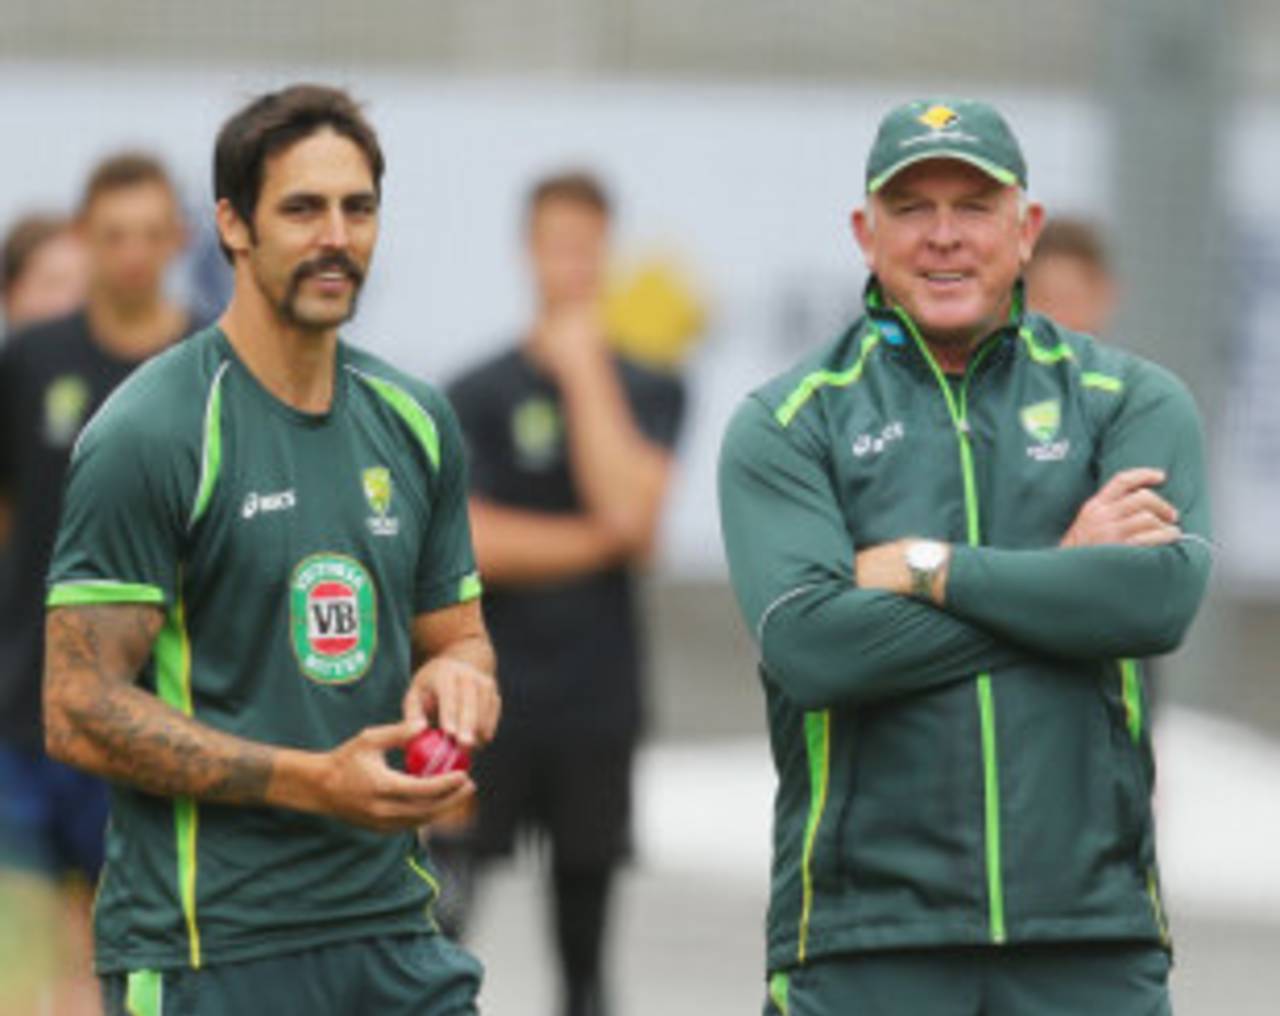 Mitchell Johnson and Craig McDermott at a training session, Melbourne, December 23, 2013